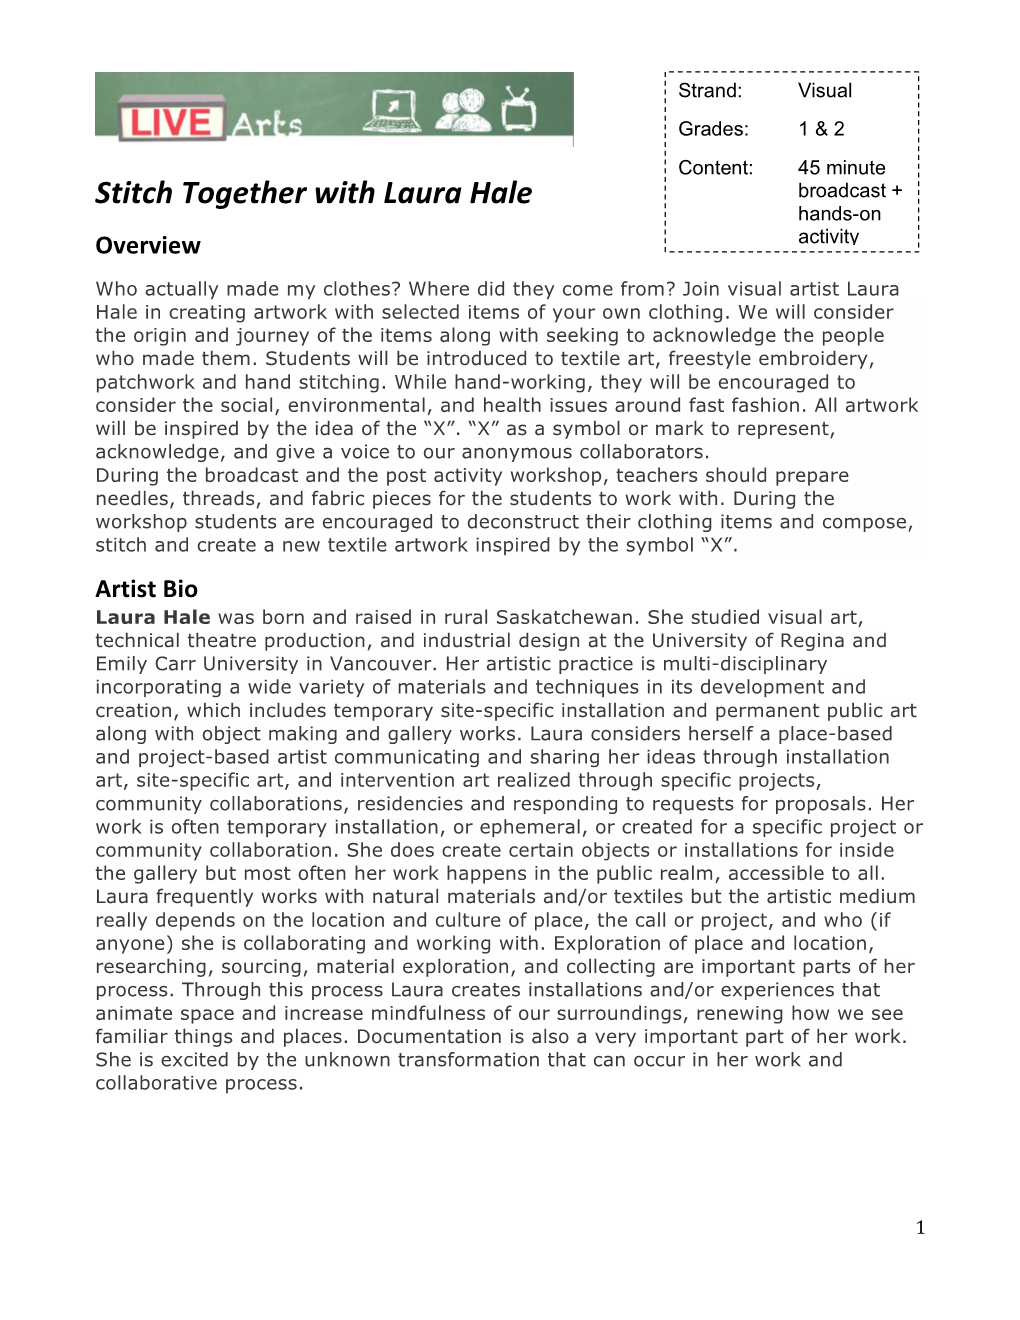 Stitch Together with Laura Hale Broadcast + Hands-On Overview Activity